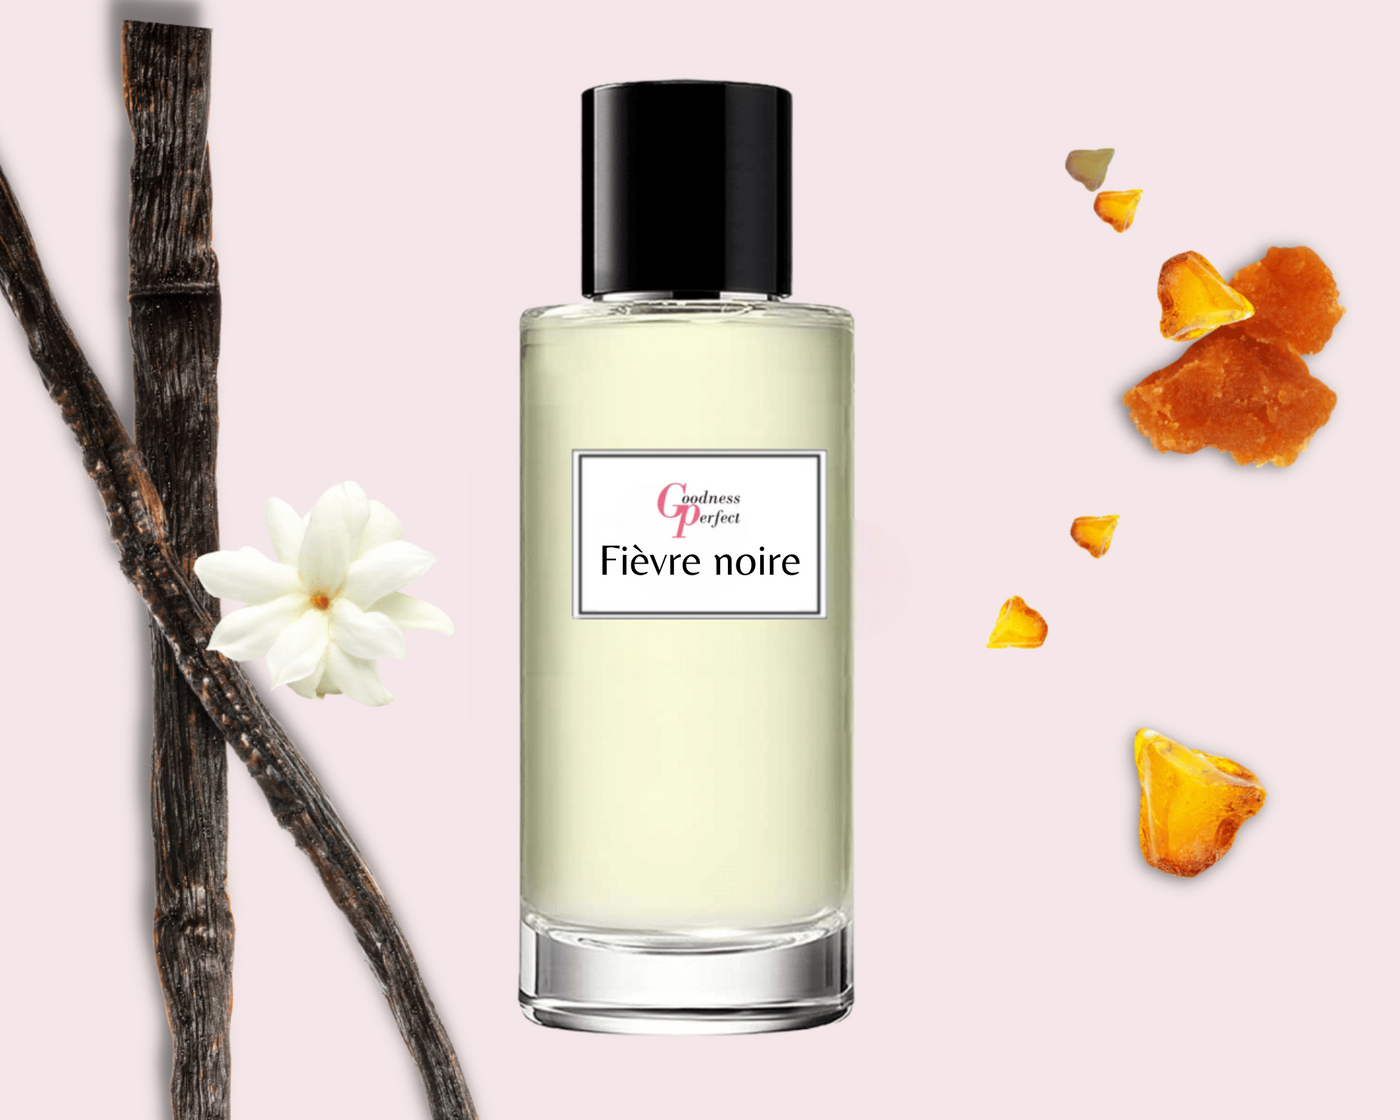 Fèvre Noire fragrance inspired by Black Opium